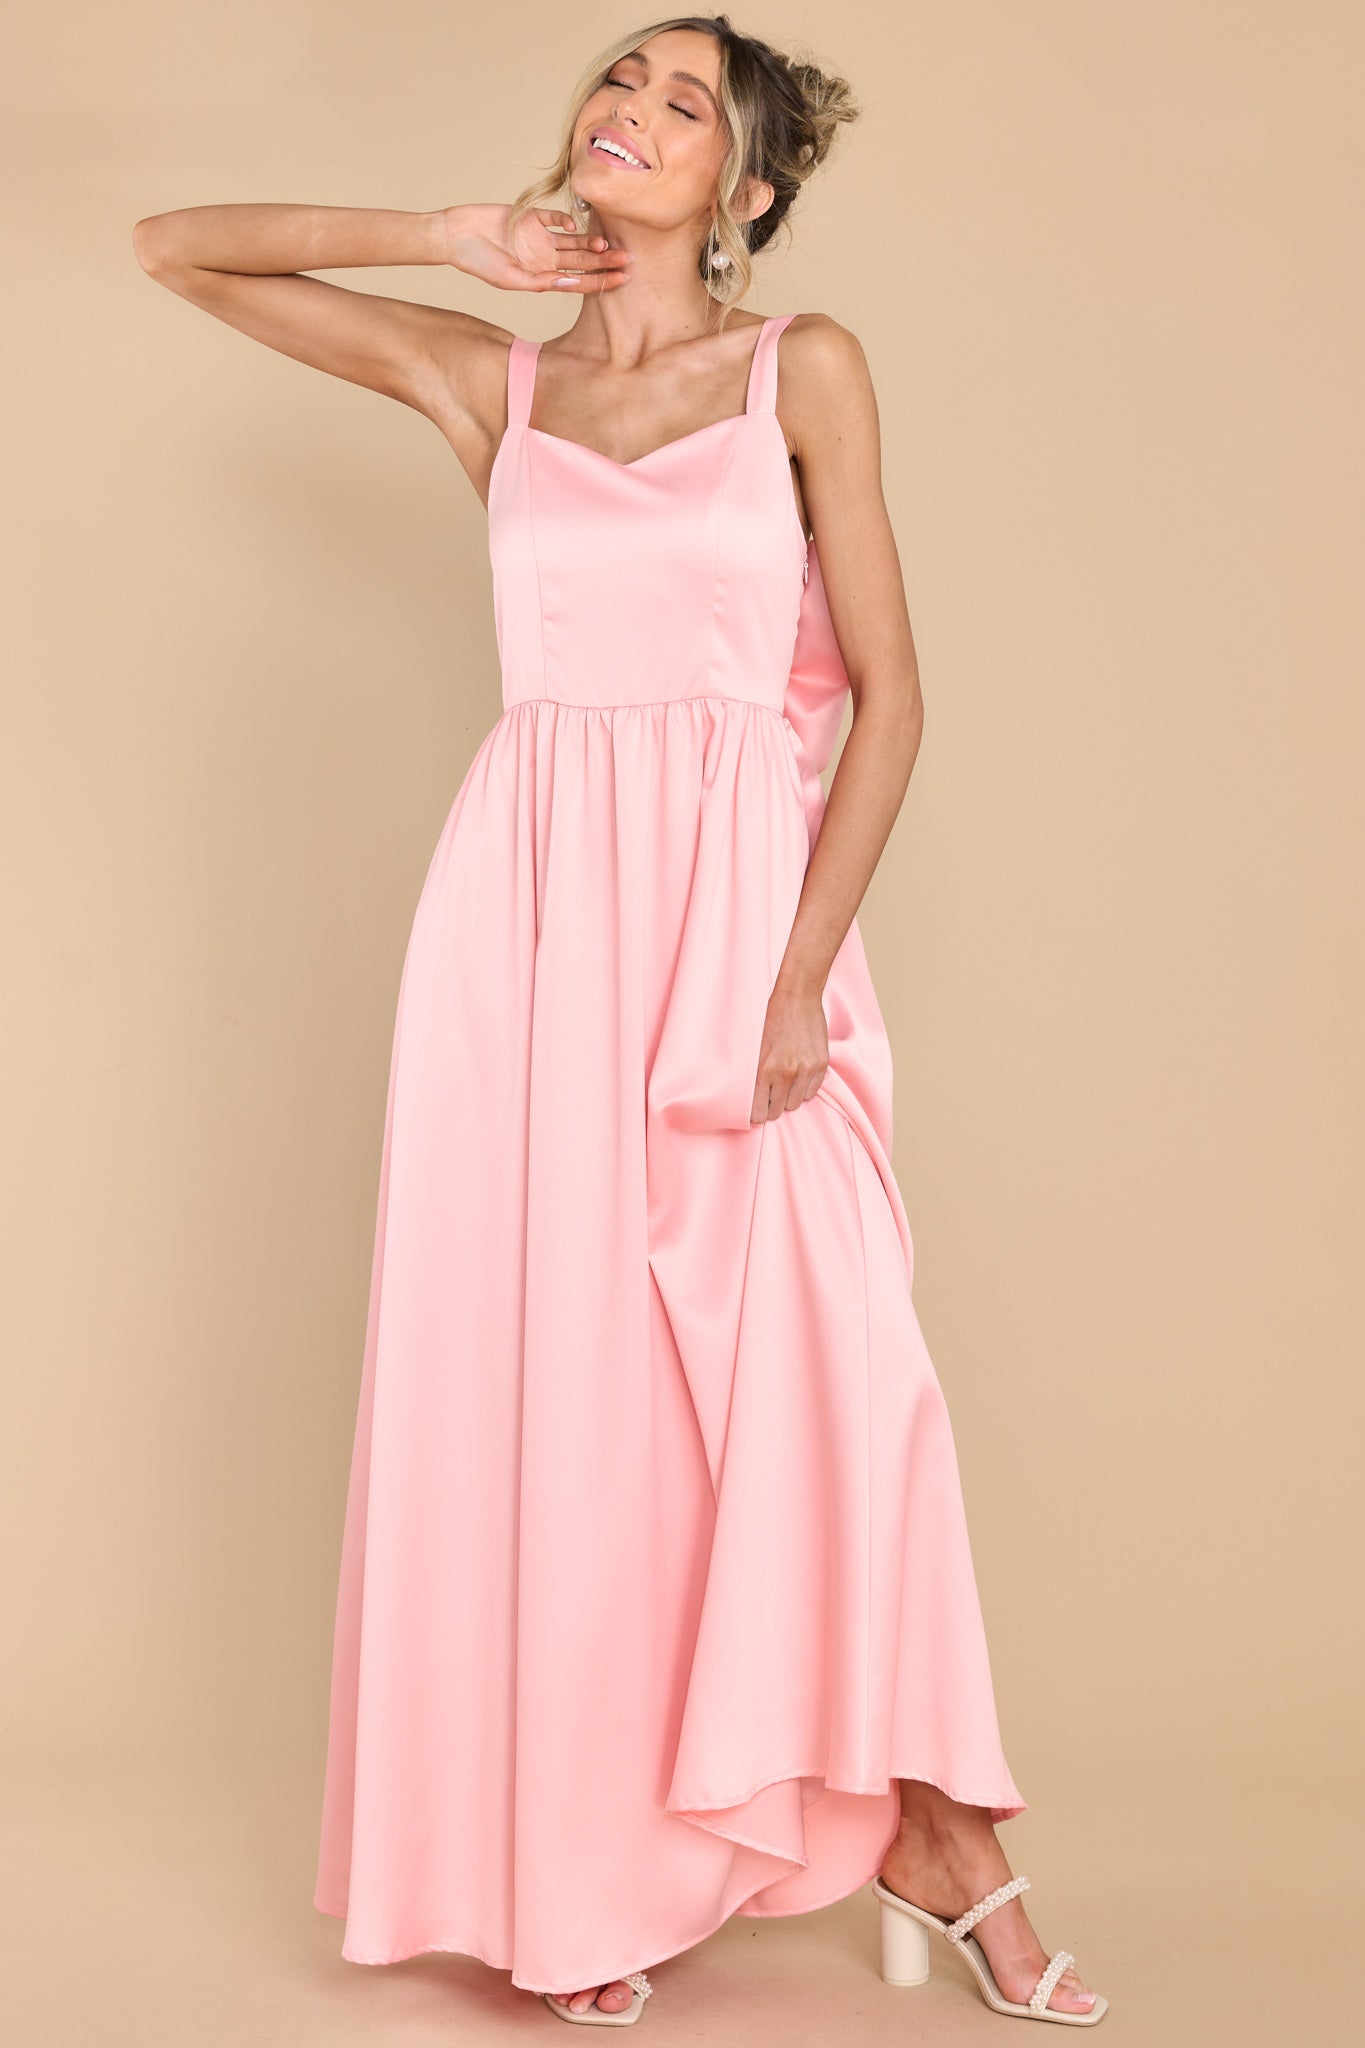 Stretchable, Comfortable And Soft Pink Formal Wear Ankle Length